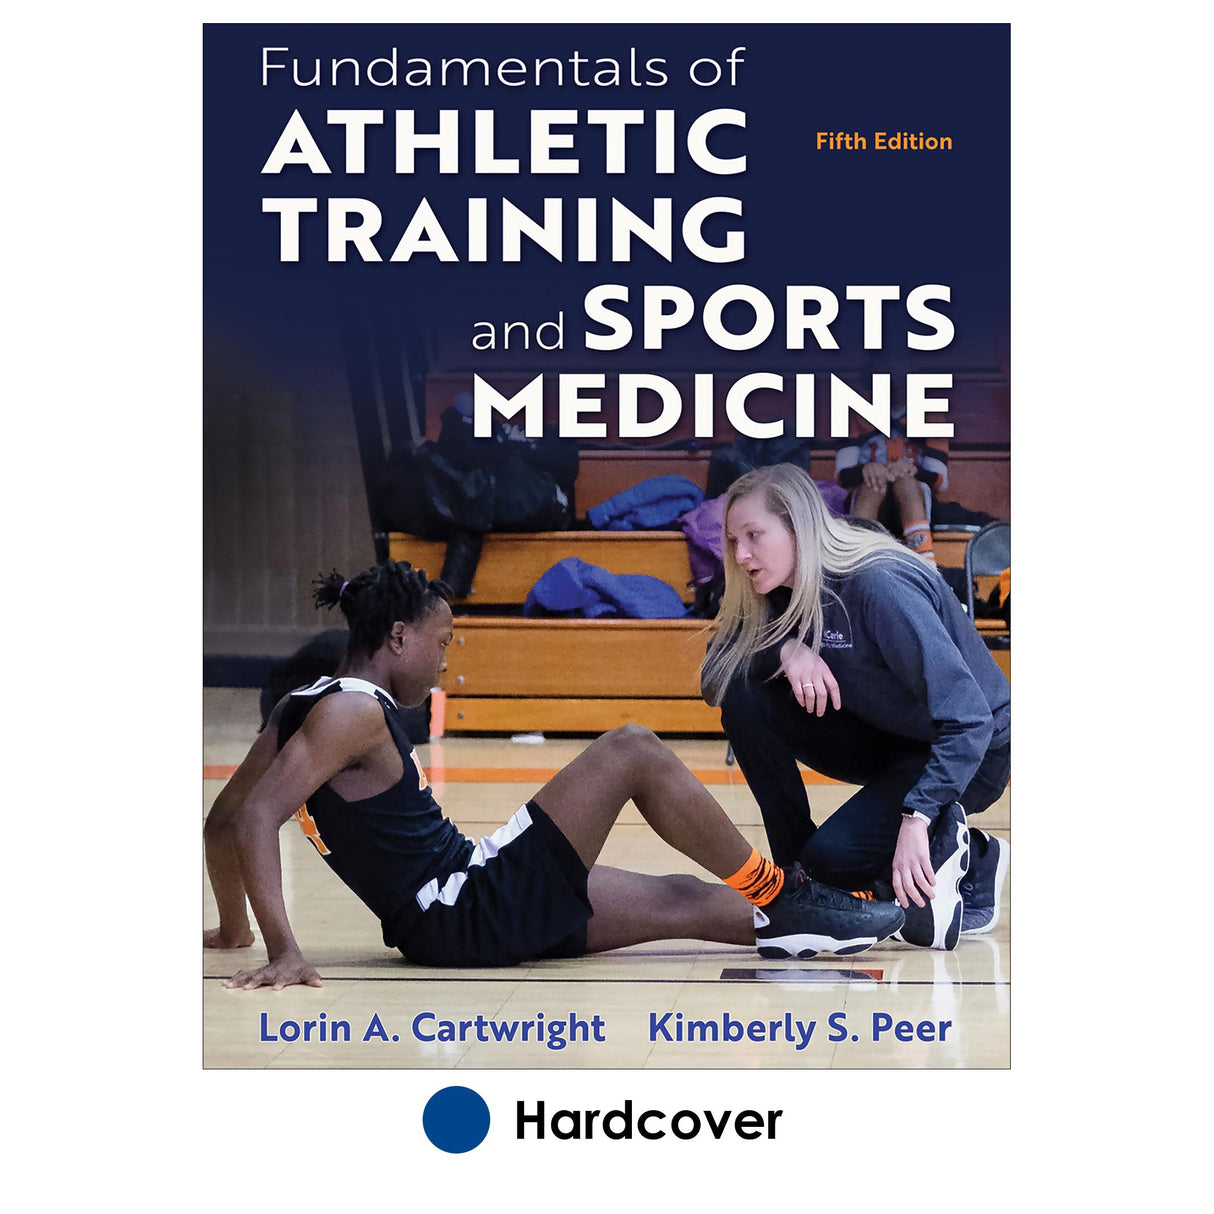 Fundamentals of Athletic Training and Sports Medicine-5th Edition